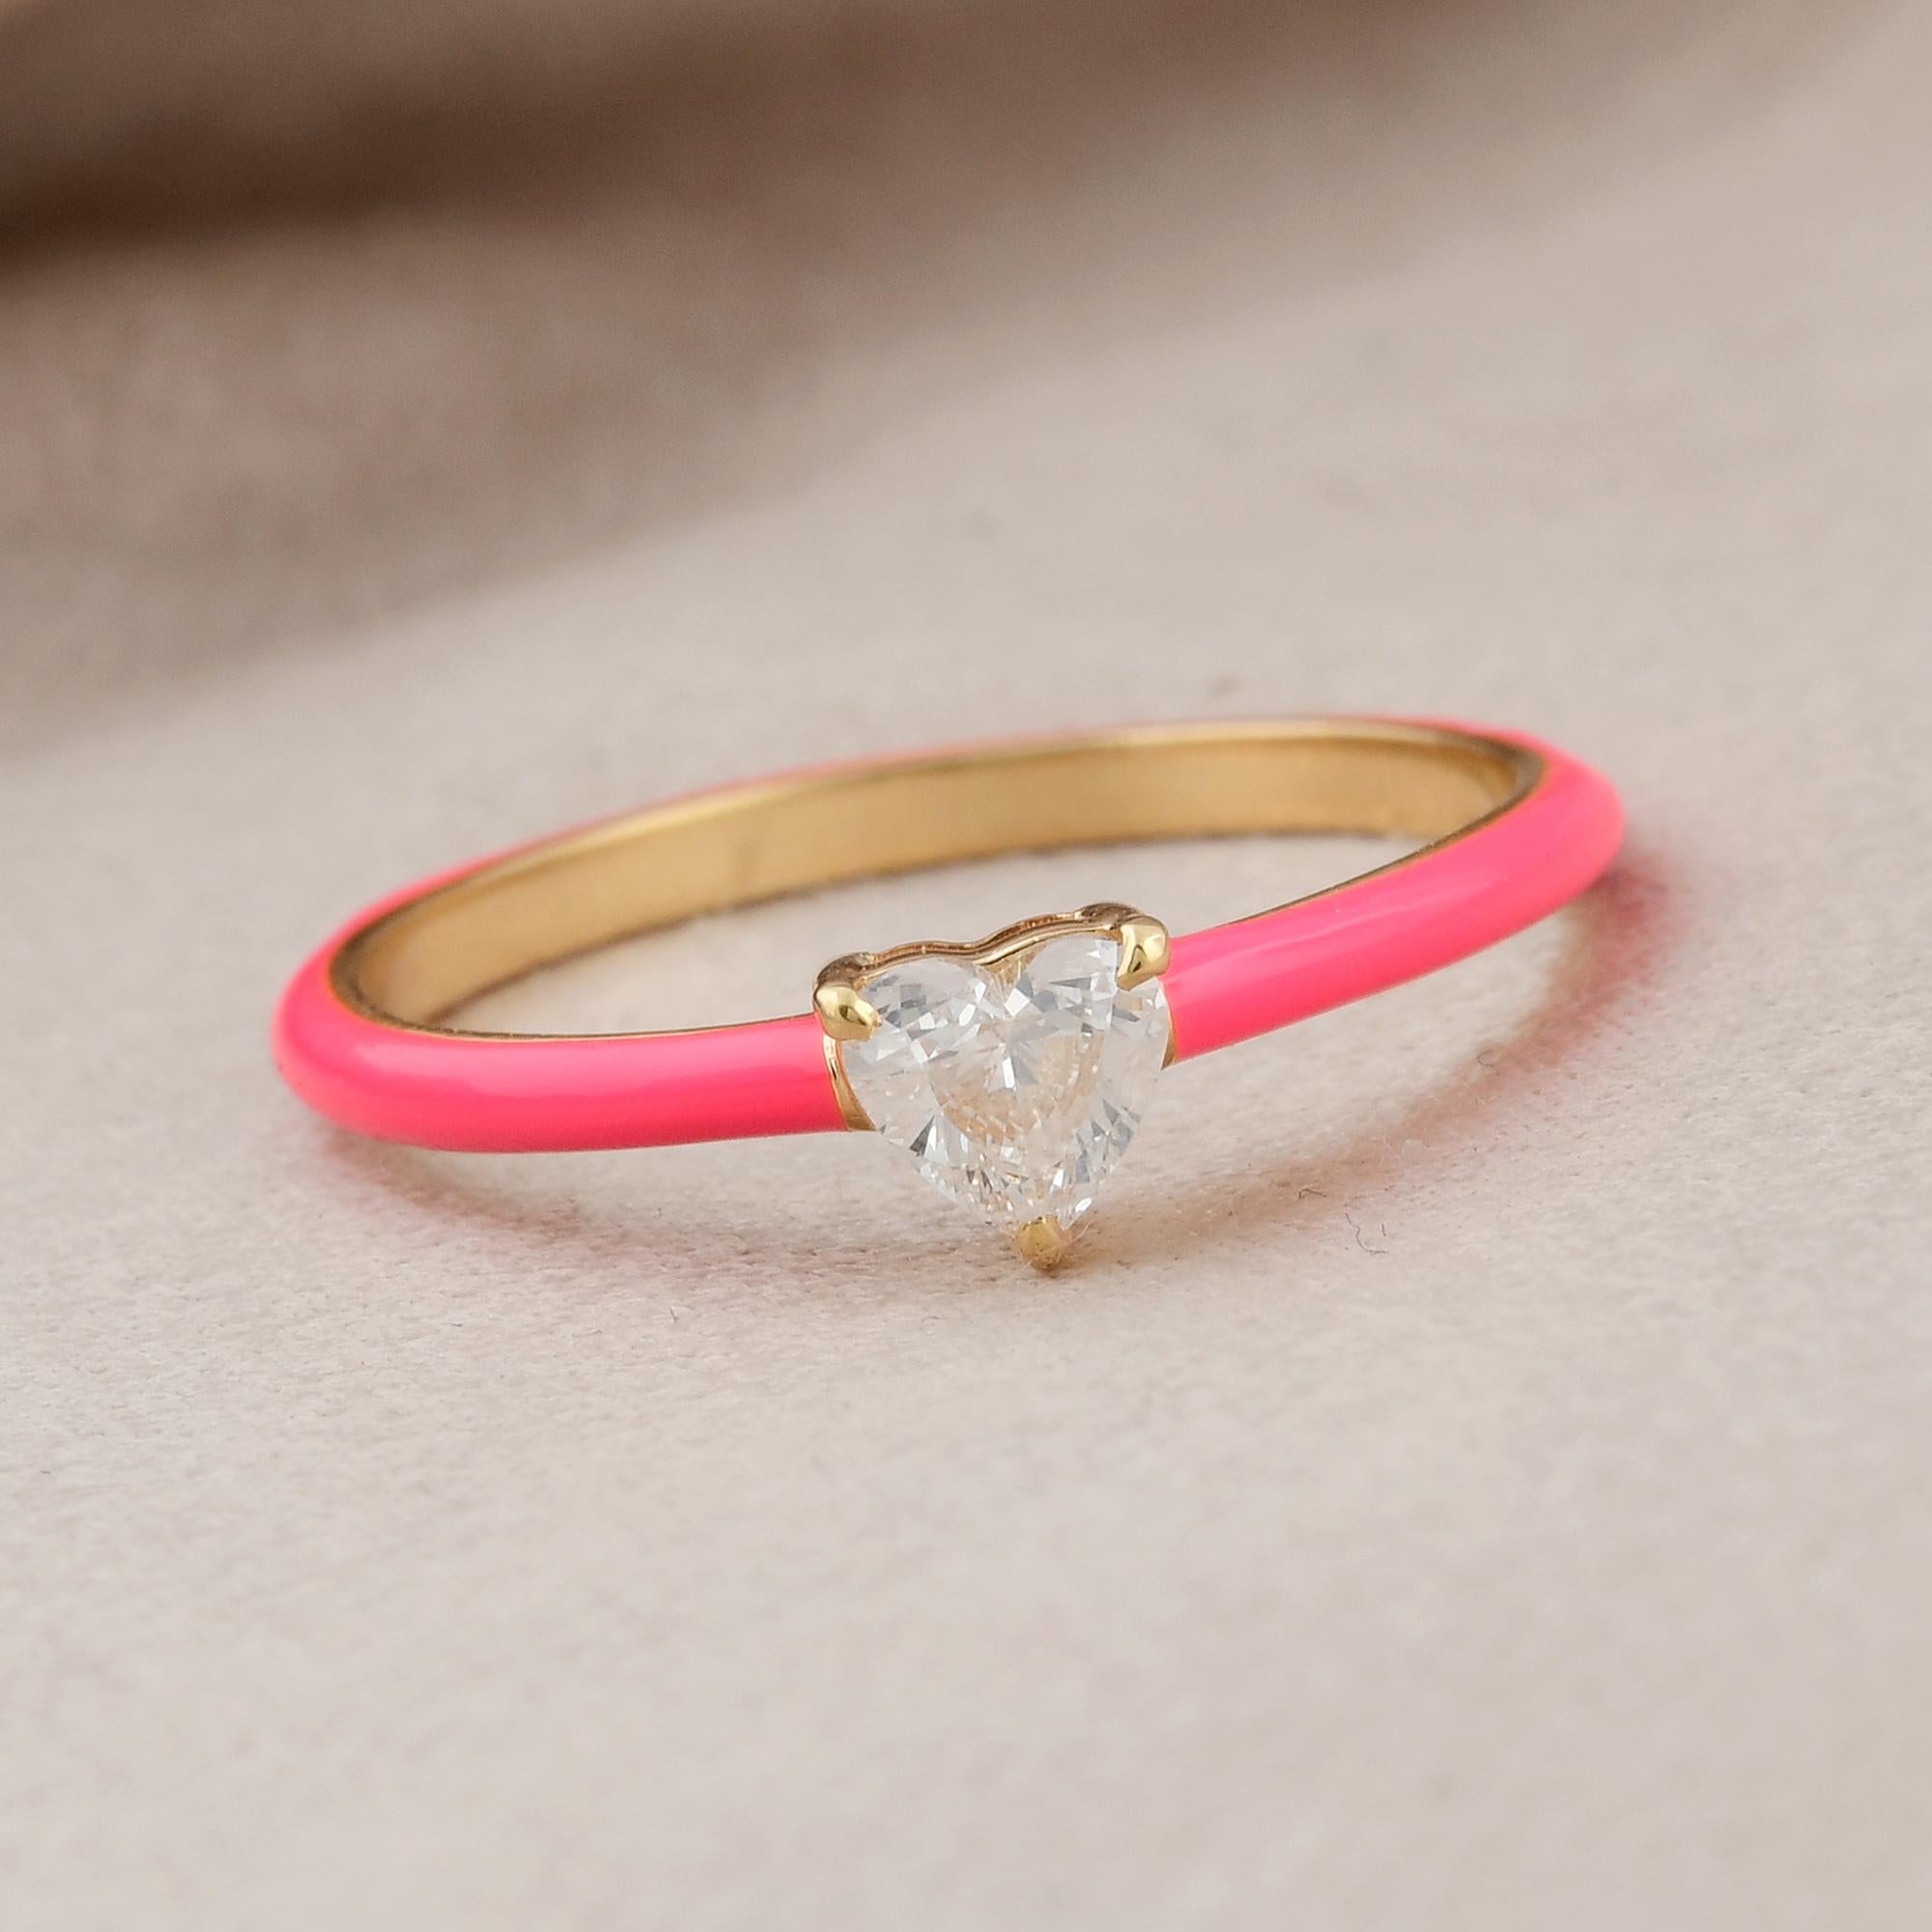 For Sale:  0.3 Carat Solitaire Heart Diamond Red Enamel Band Ring 14 Kt Yellow Gold Jewelry 4